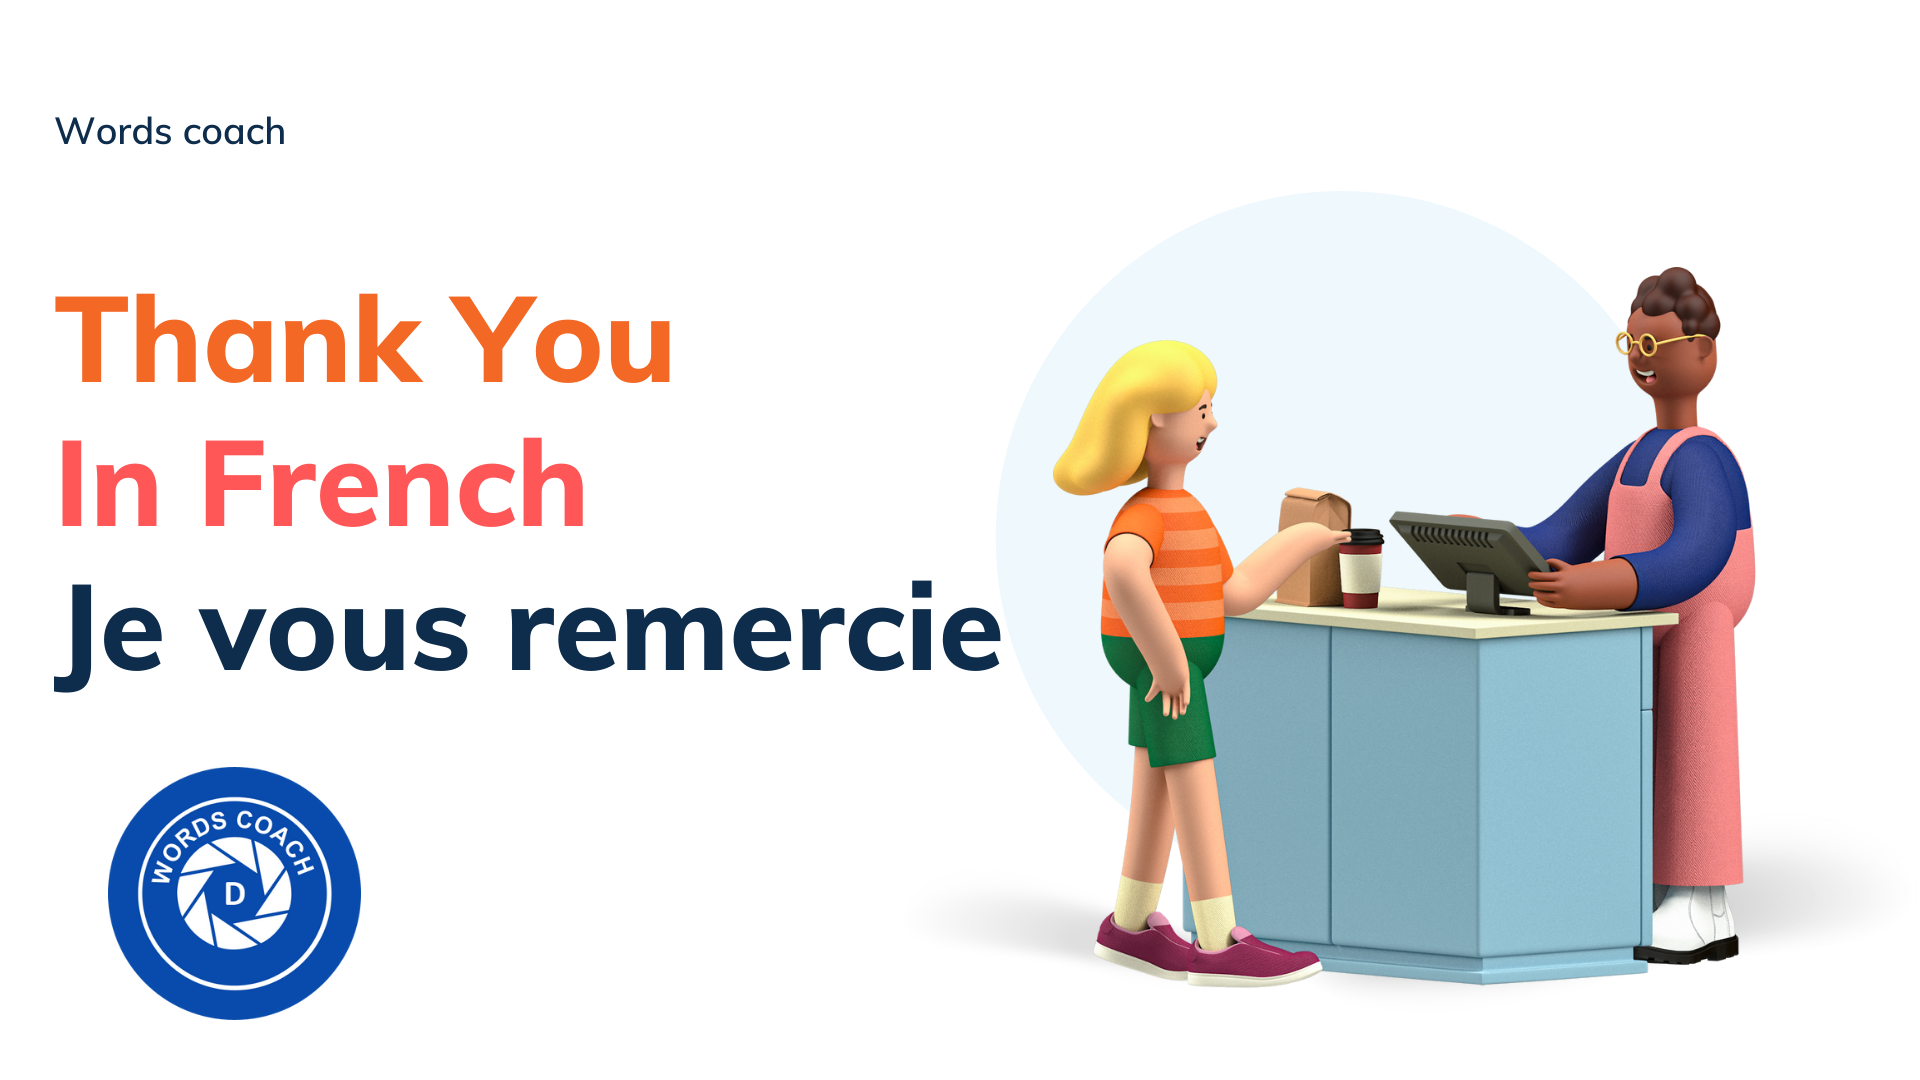 How do you say thanks in French